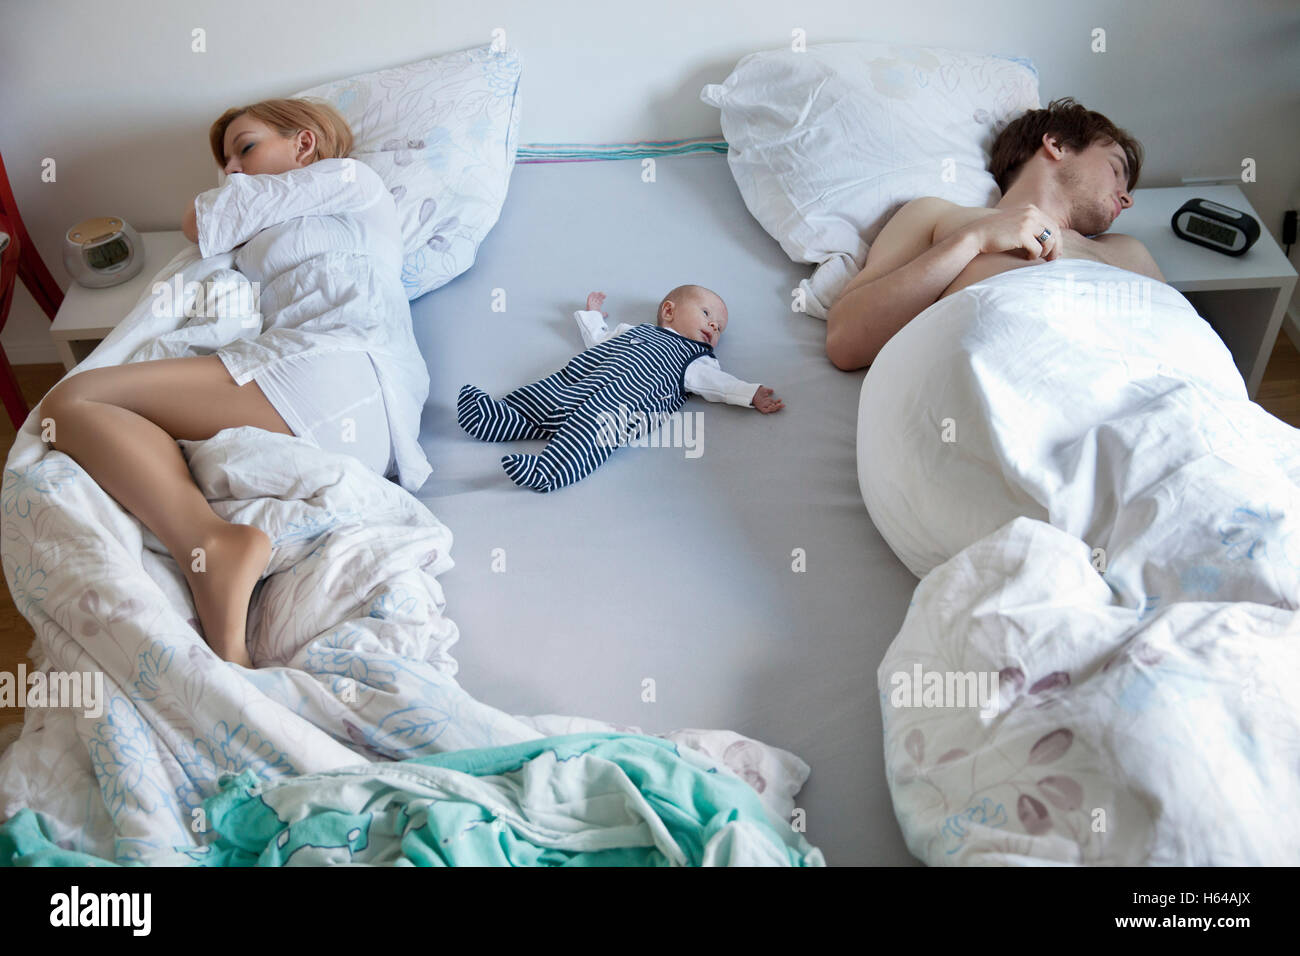 newborn baby sleeping in bed with parents